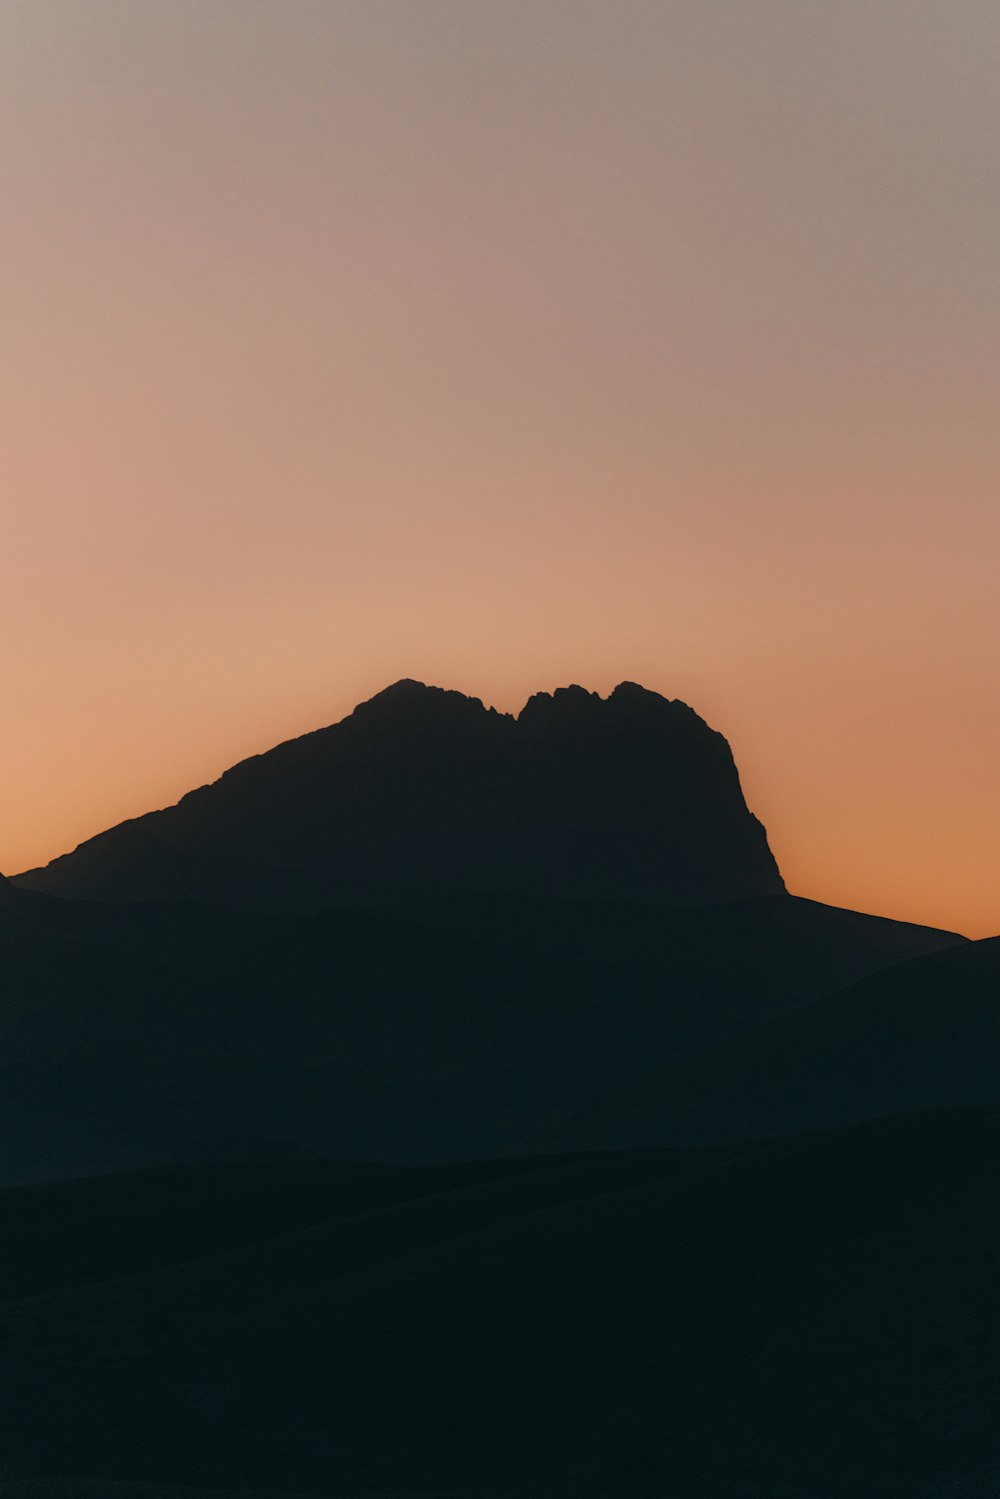 the silhouette of a mountain against a sunset sky